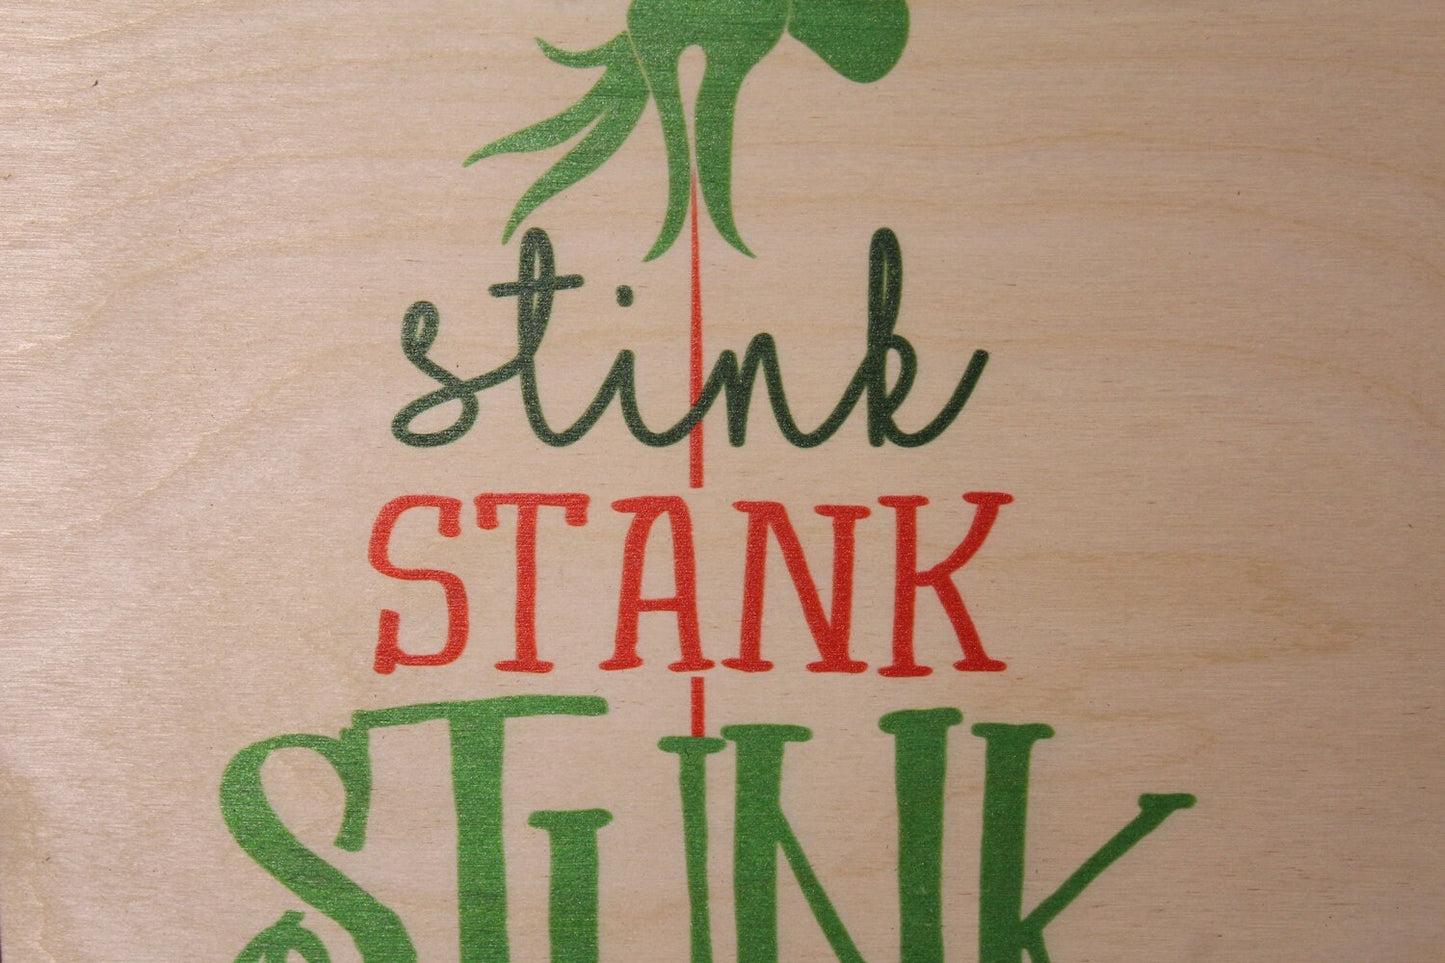 Stink Stank Stunk Farmhouse Sign Wood Youre a mean one Christmas Décor Tree Gift Cute Funny Hand Green Festive Ornament Gray Framed